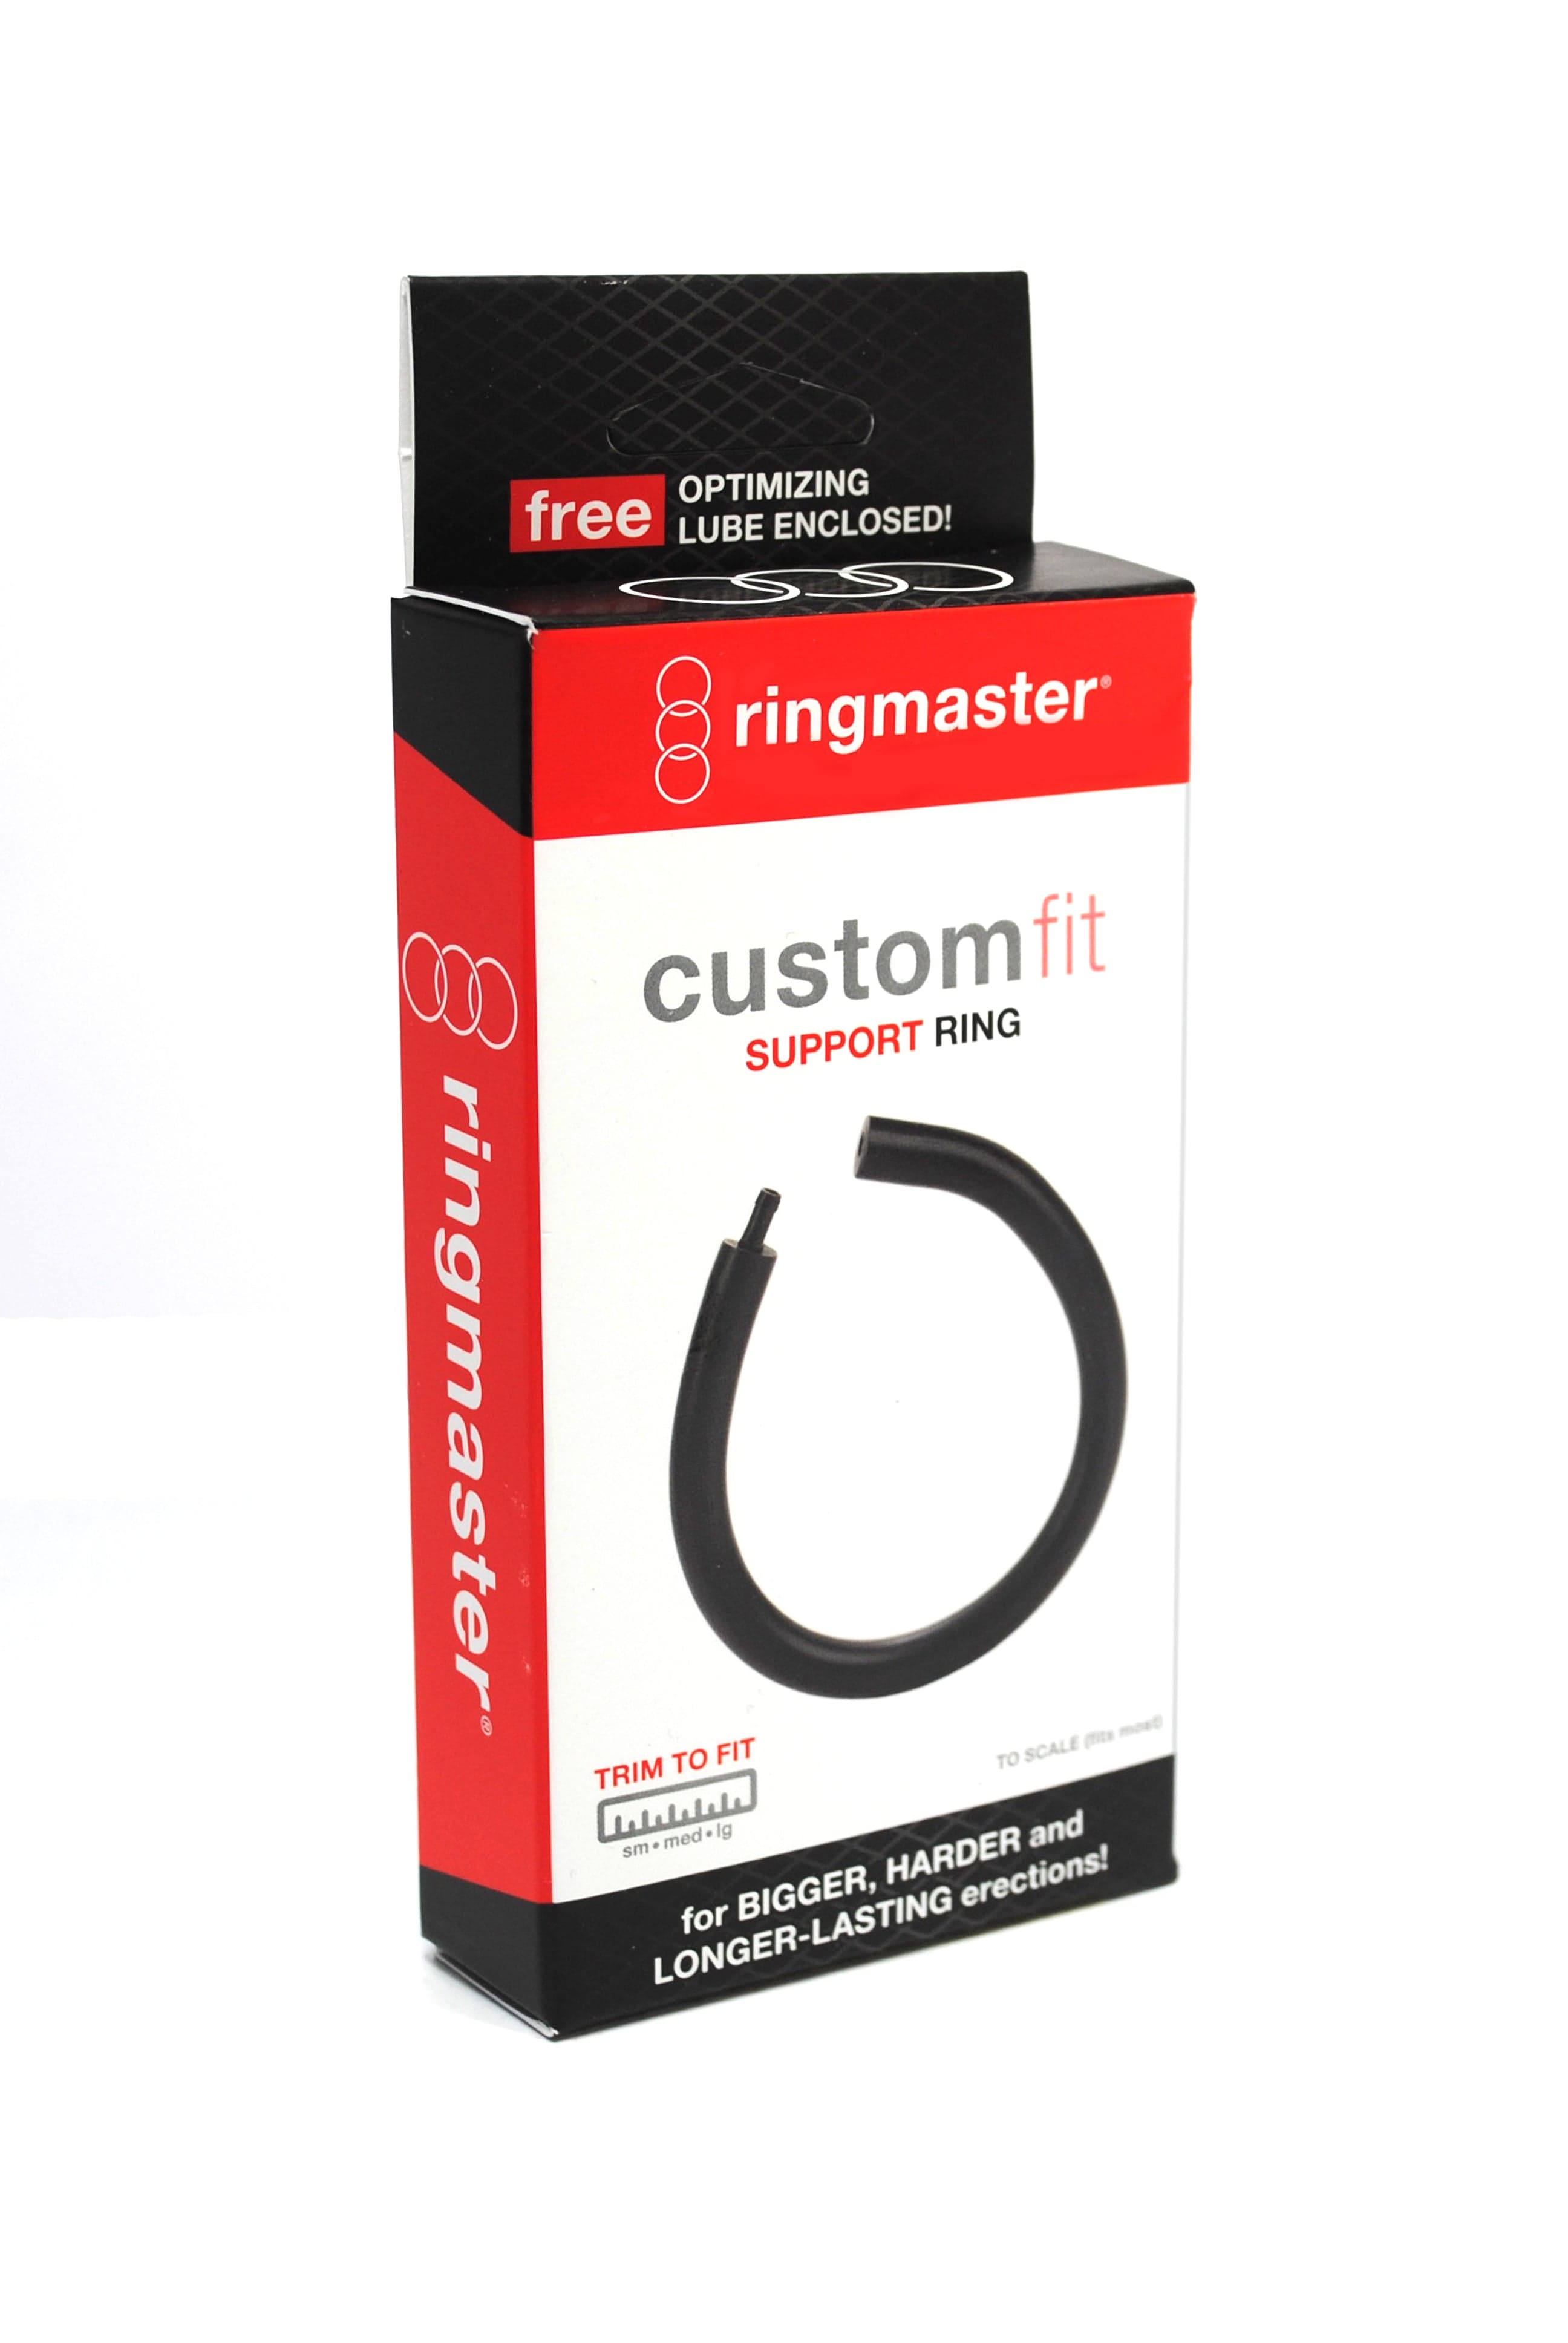 CUSTOM FIT SUPPORT RING